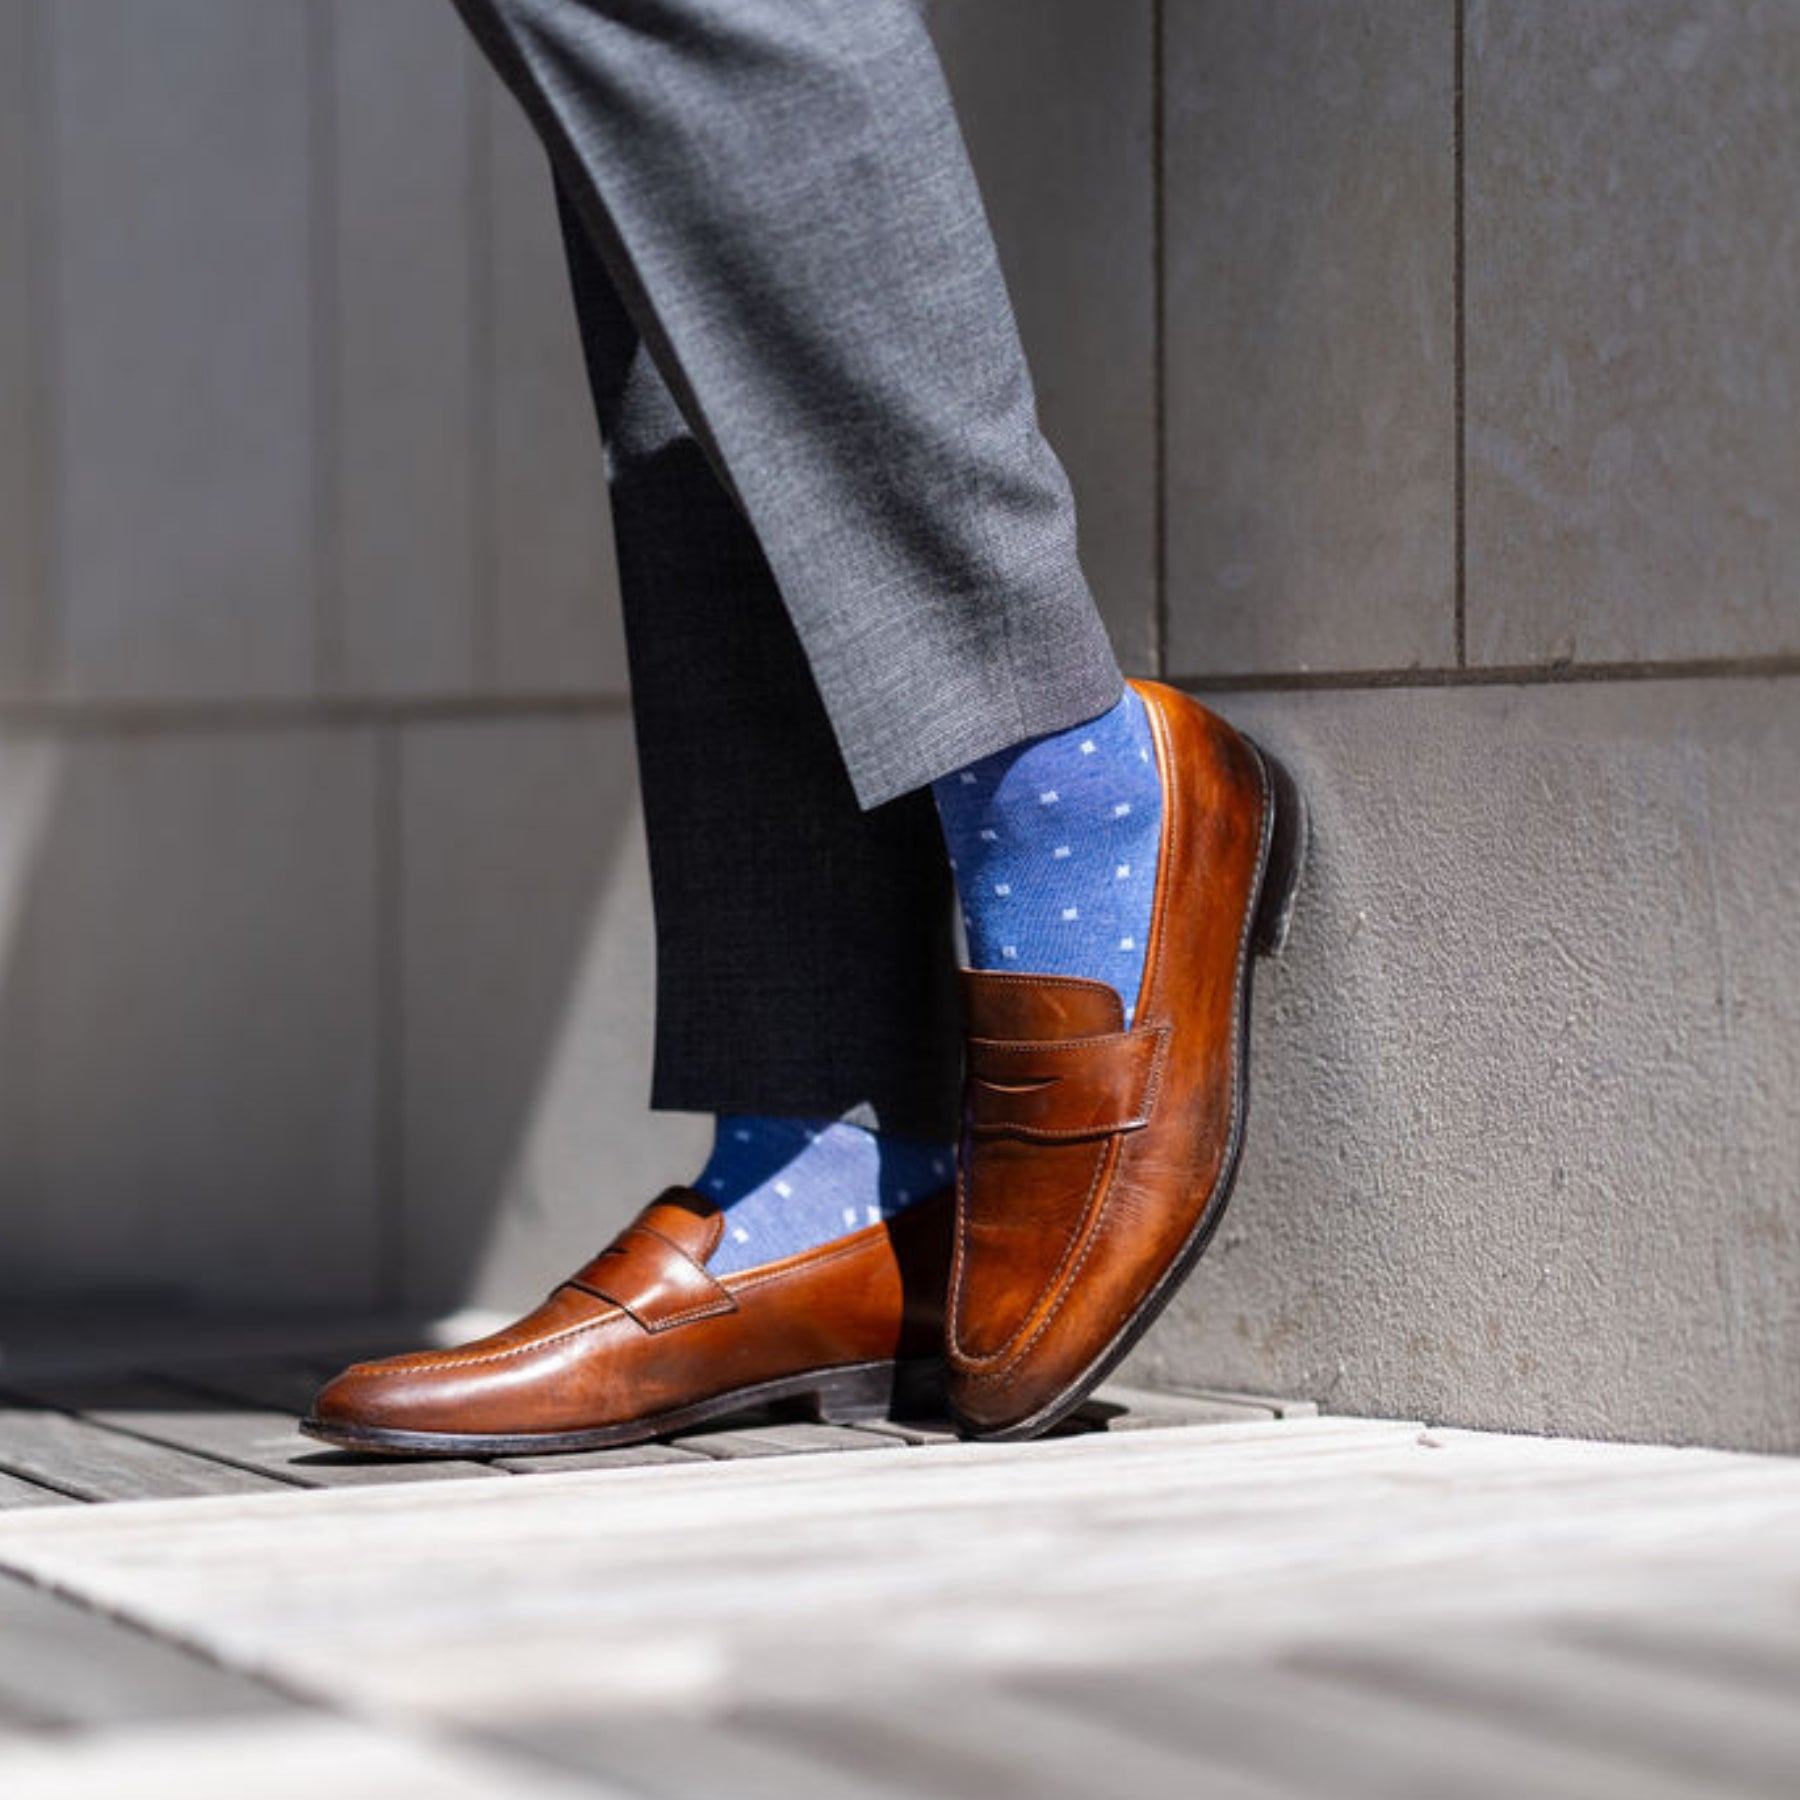 Man wearing heathered blue men's dress sock with ocean blue micro squares with grey slacks and brown shoes